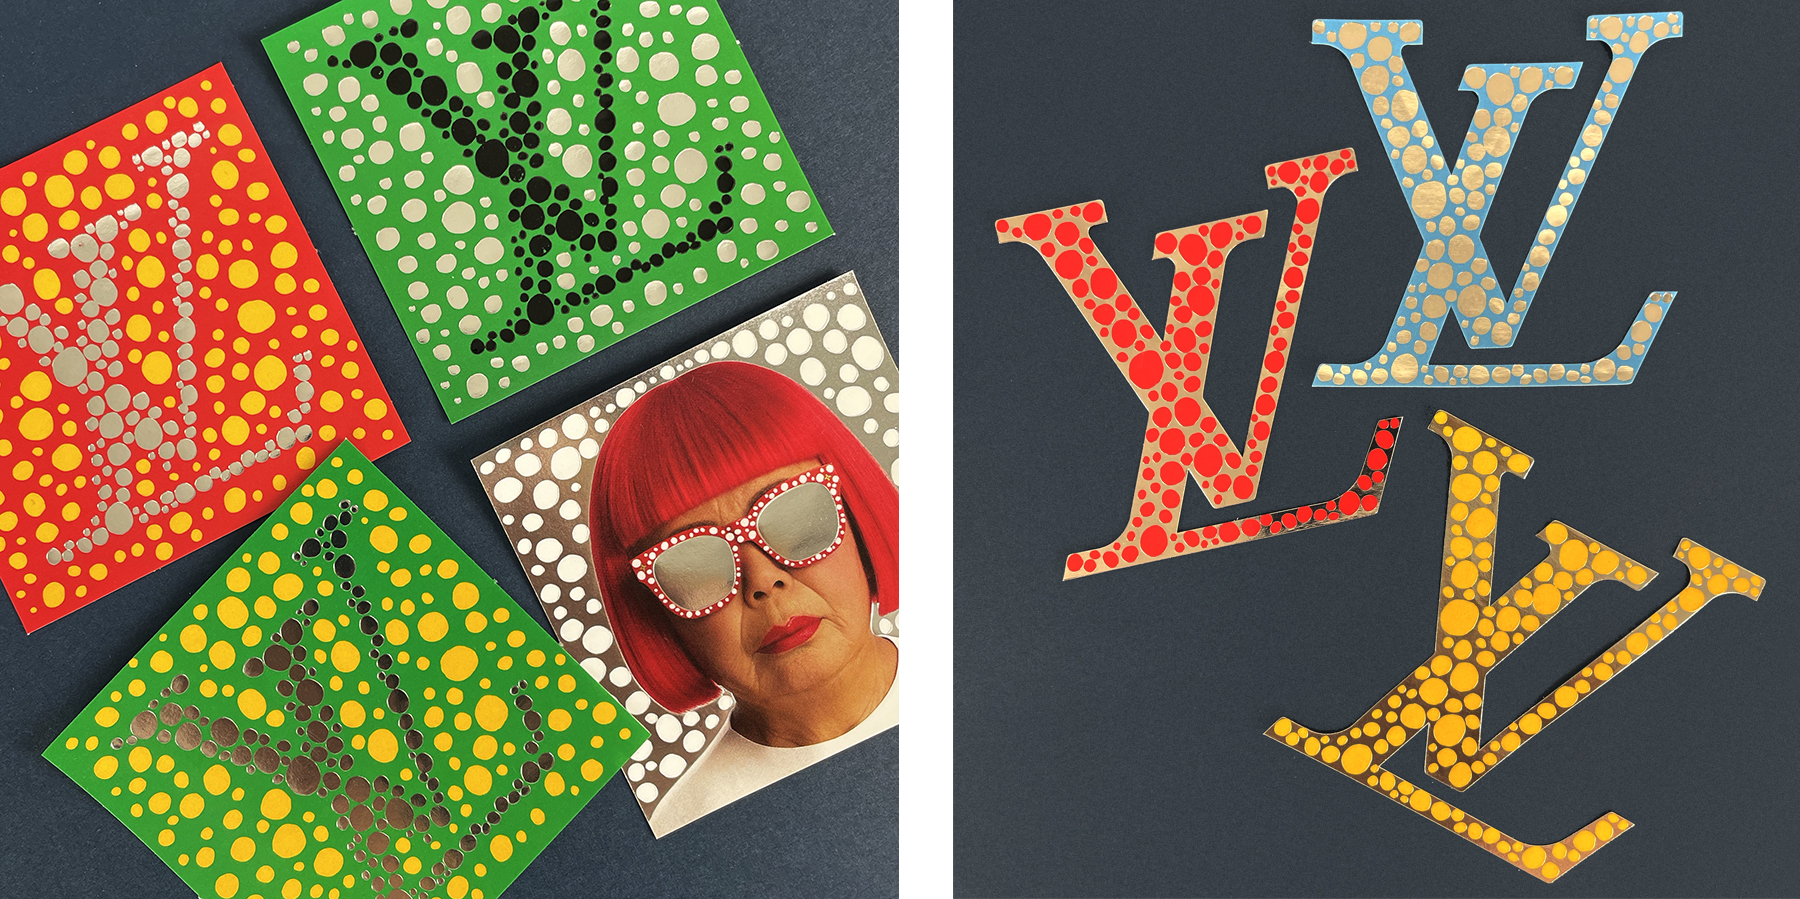 Harrods is painted in dots in latest Louis Vuitton x Kusama collaboration